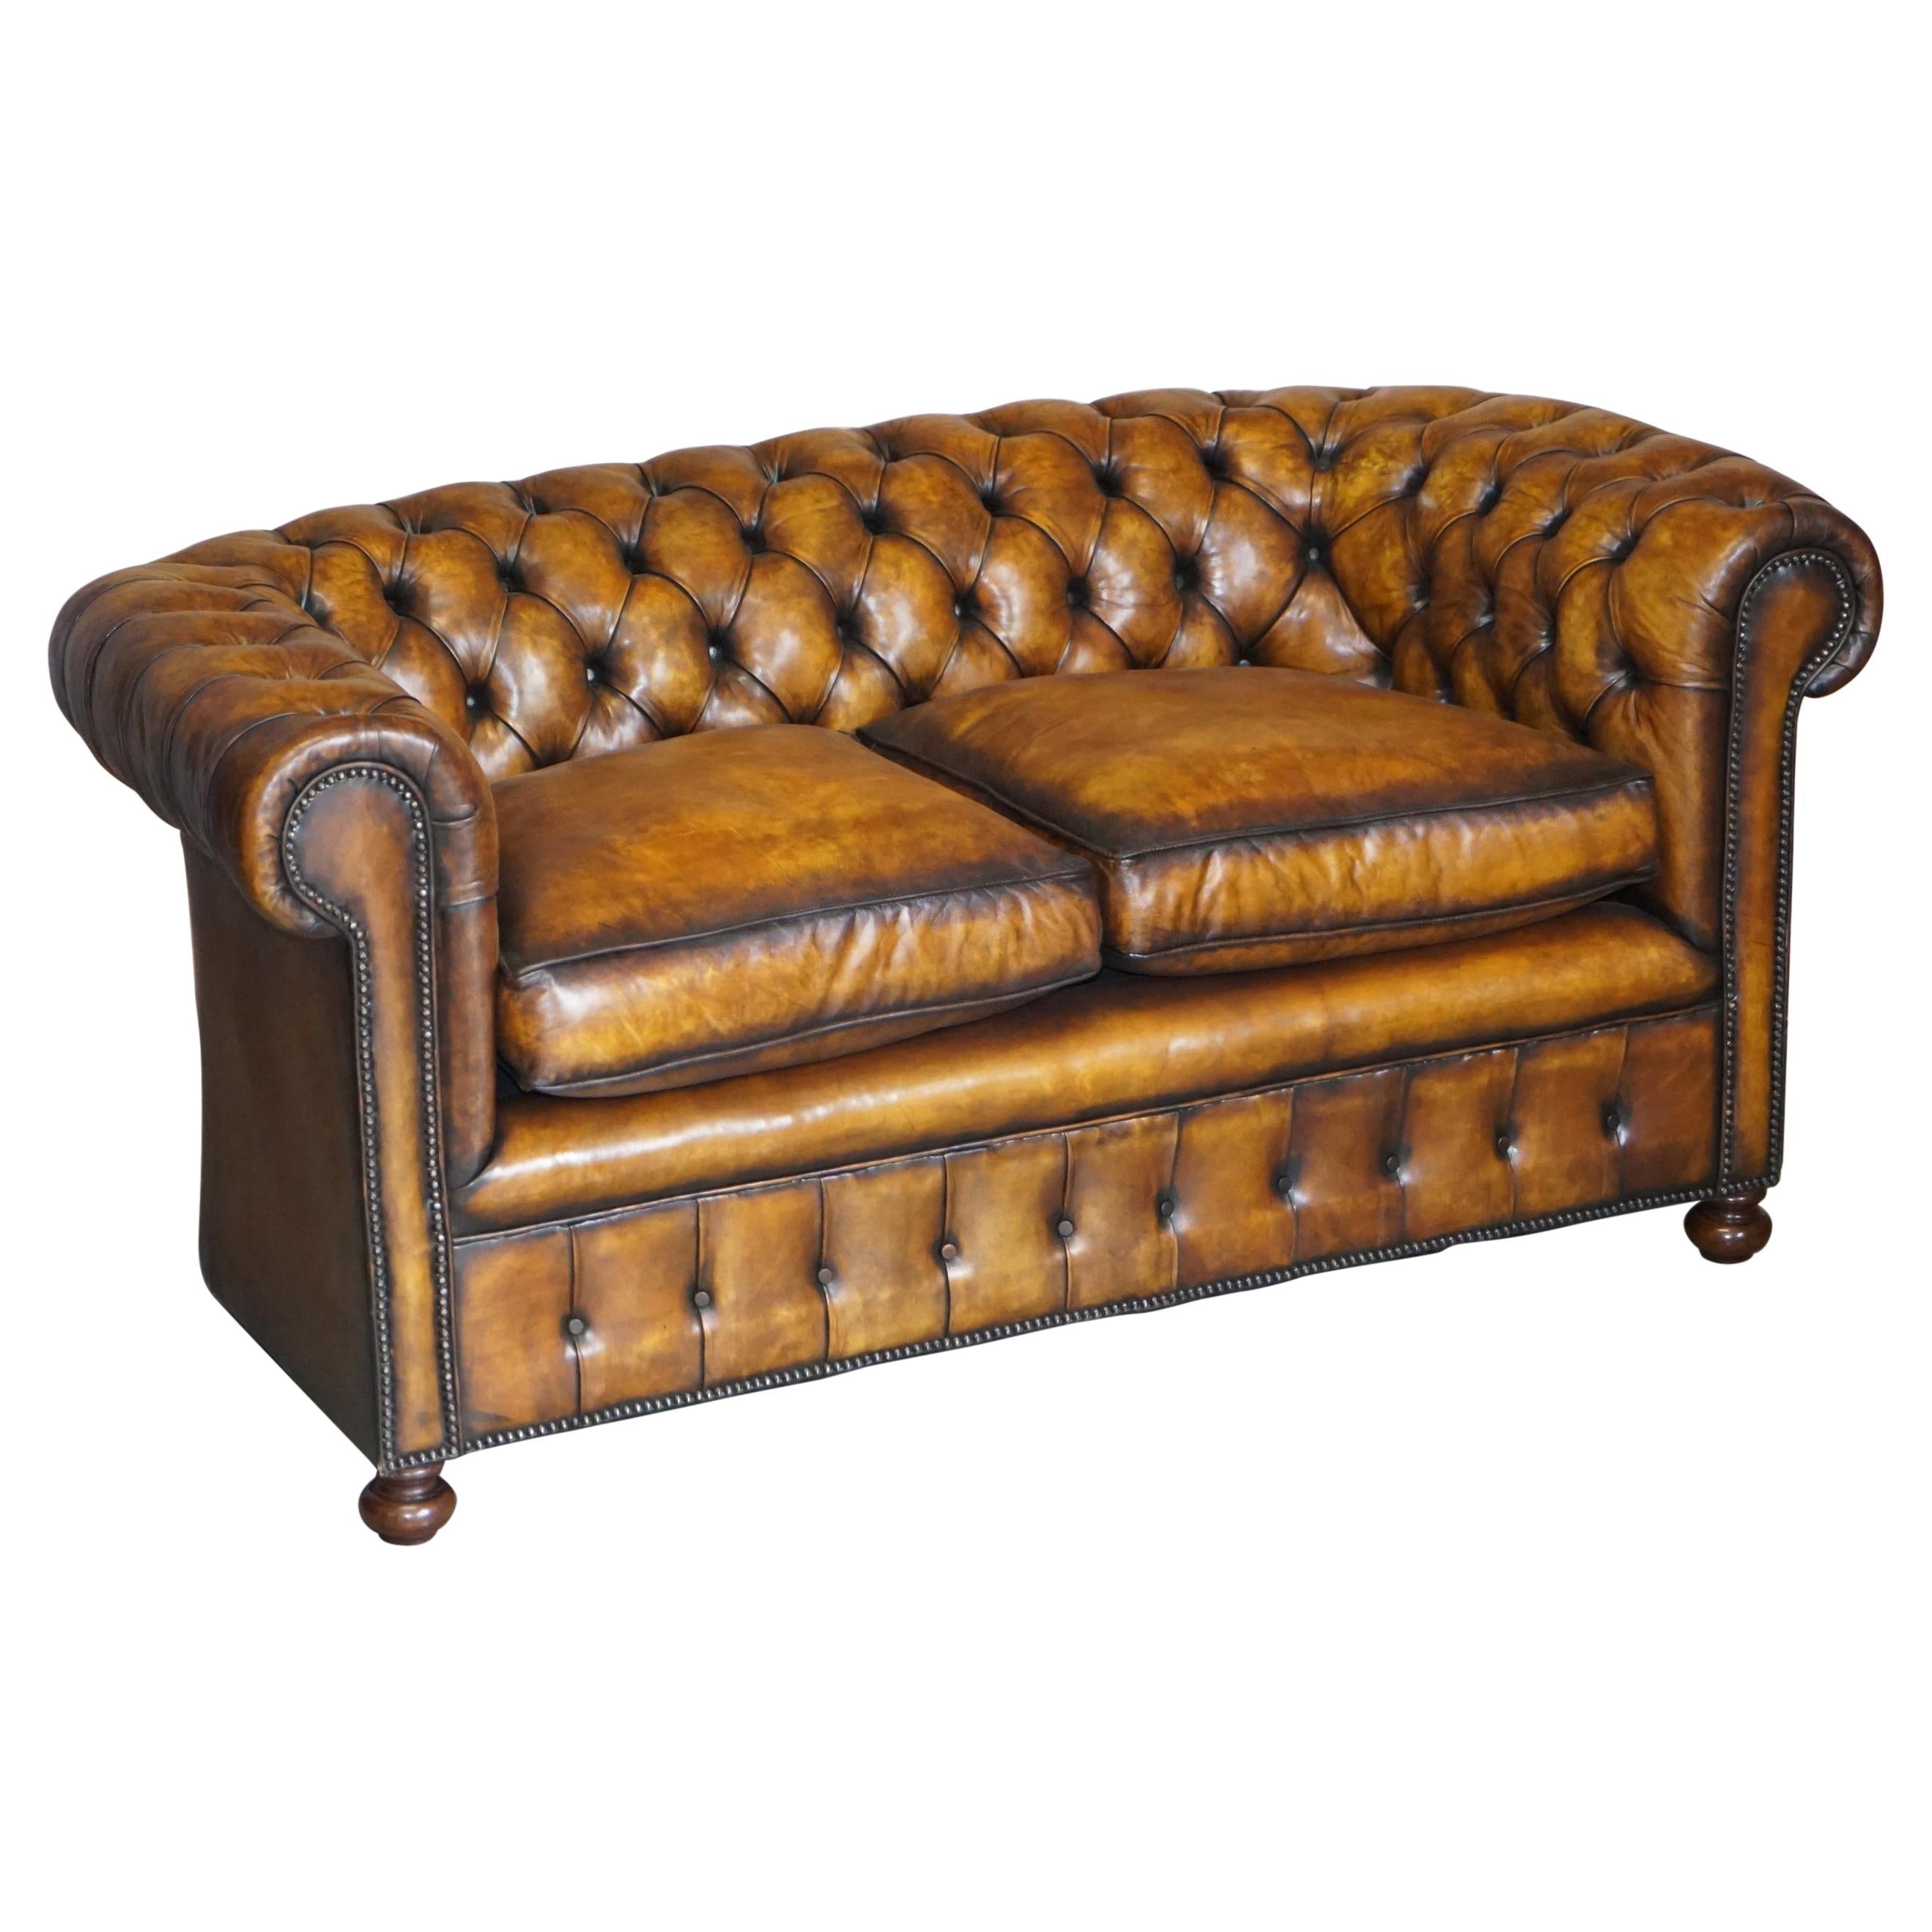 Restored Rich Cigar Brown Leather Chesterfield Club Sofa Feather Filled Cushions